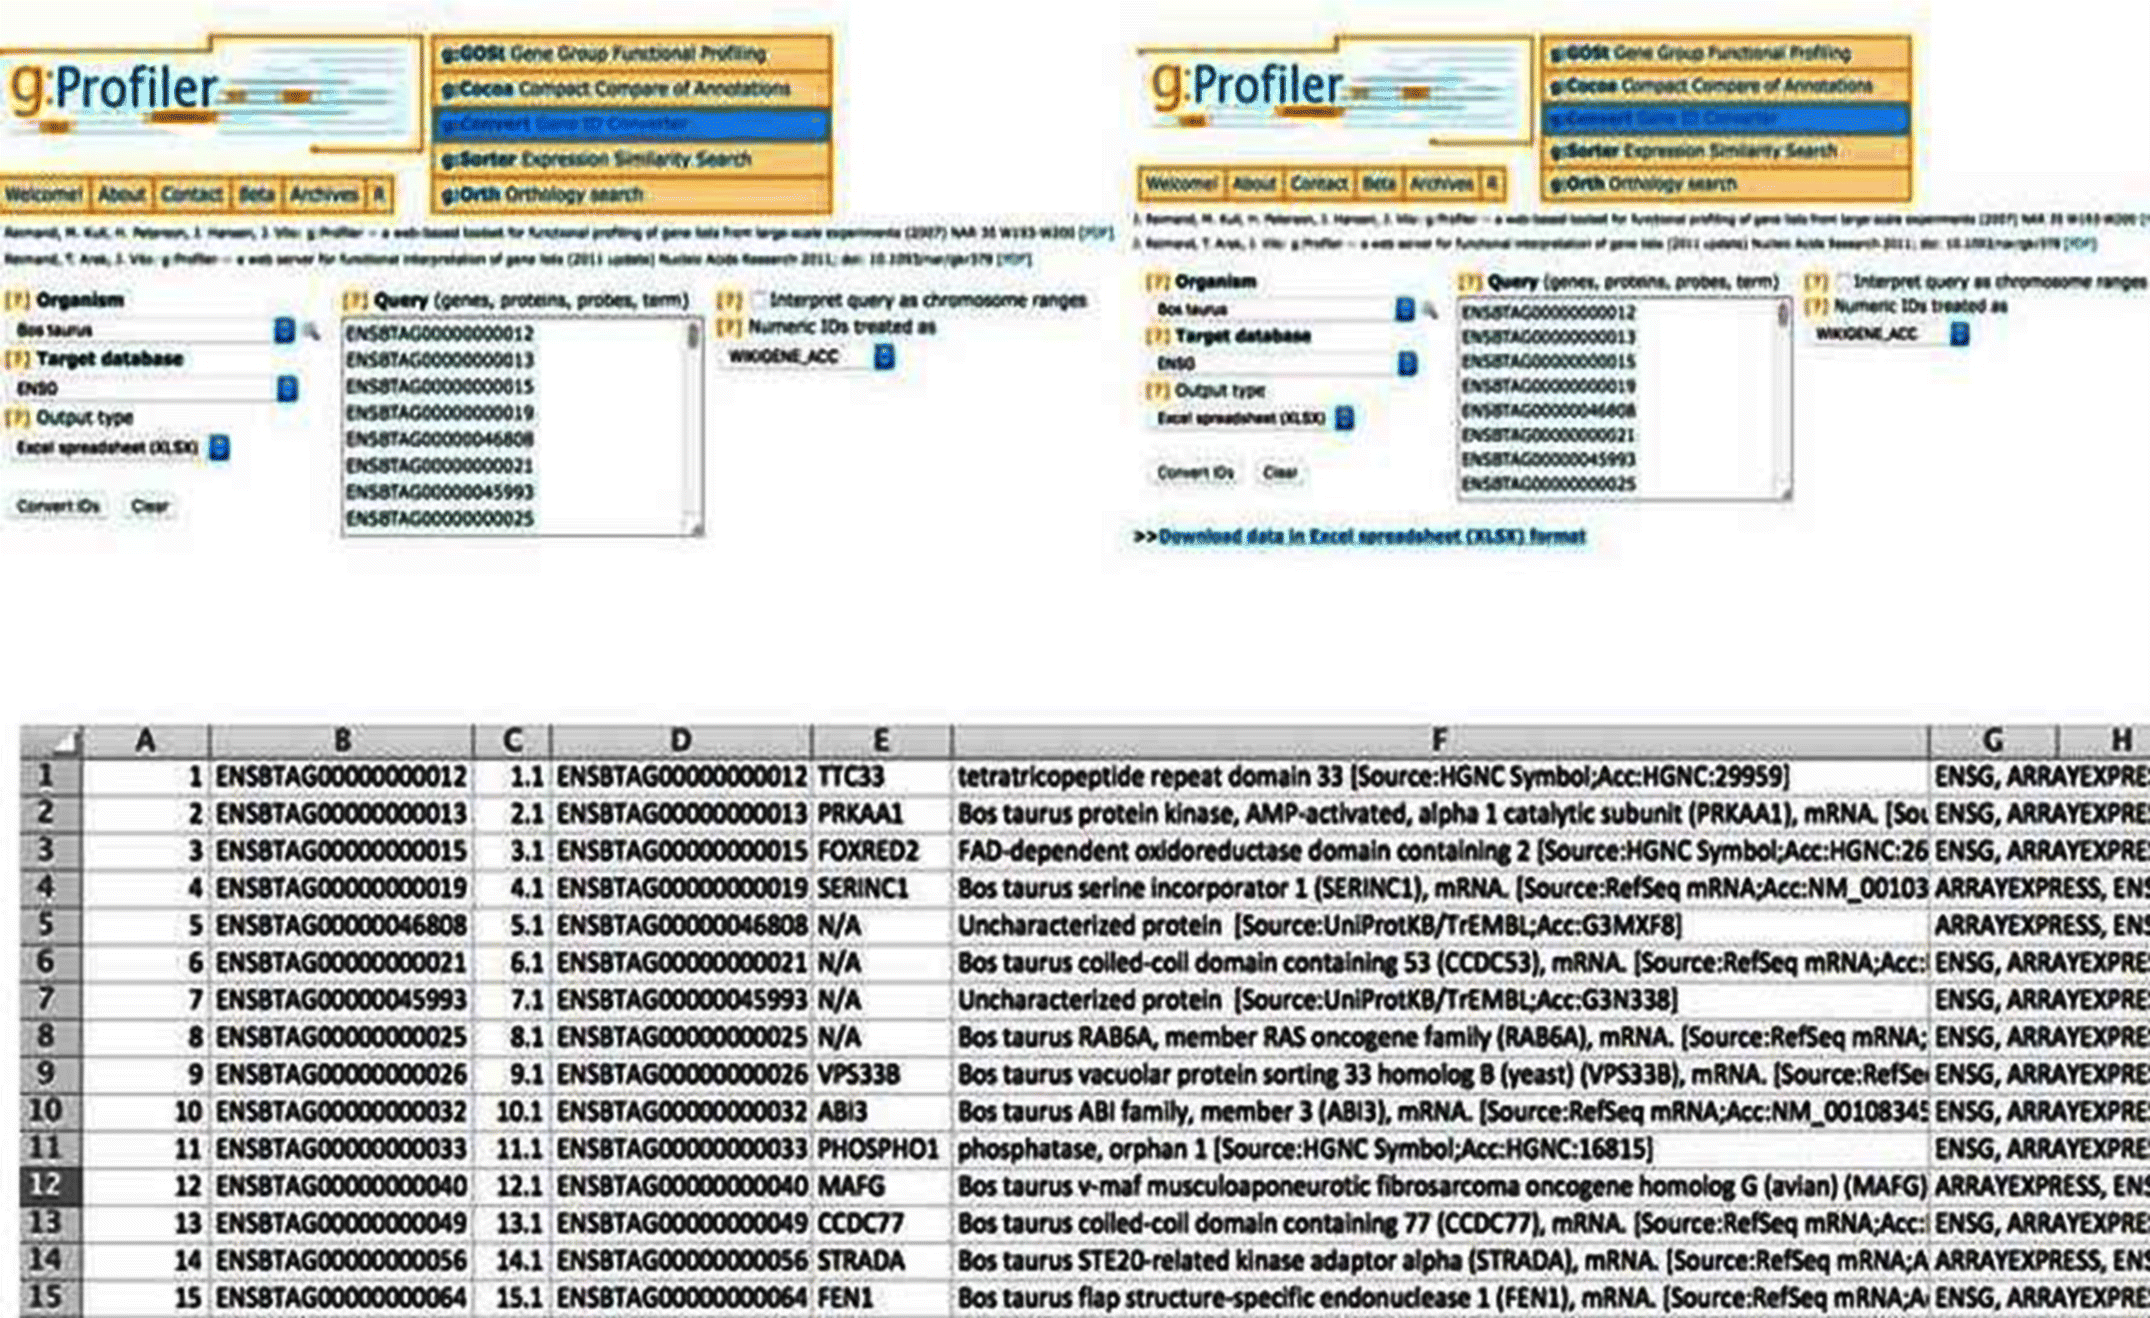 Performing the functional annotation through g:Profiler database windows (top) with the excel window (bottom).